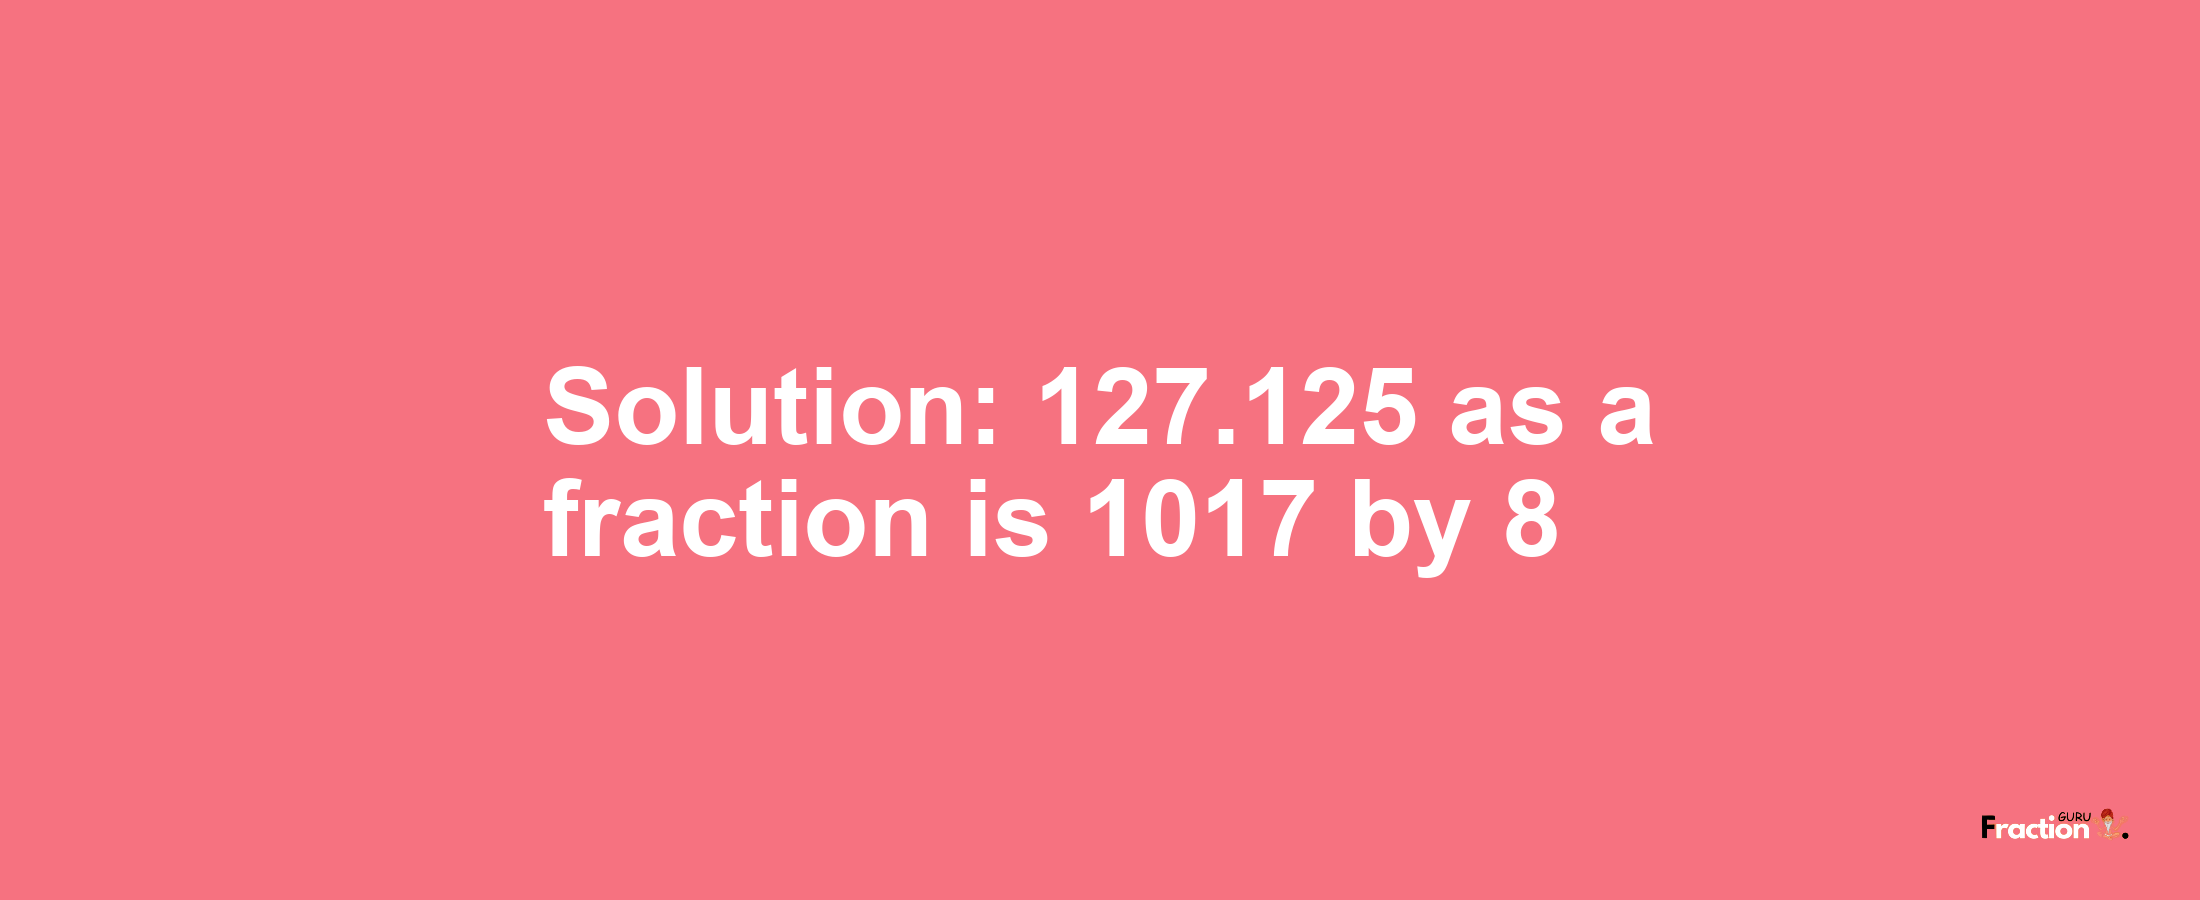 Solution:127.125 as a fraction is 1017/8